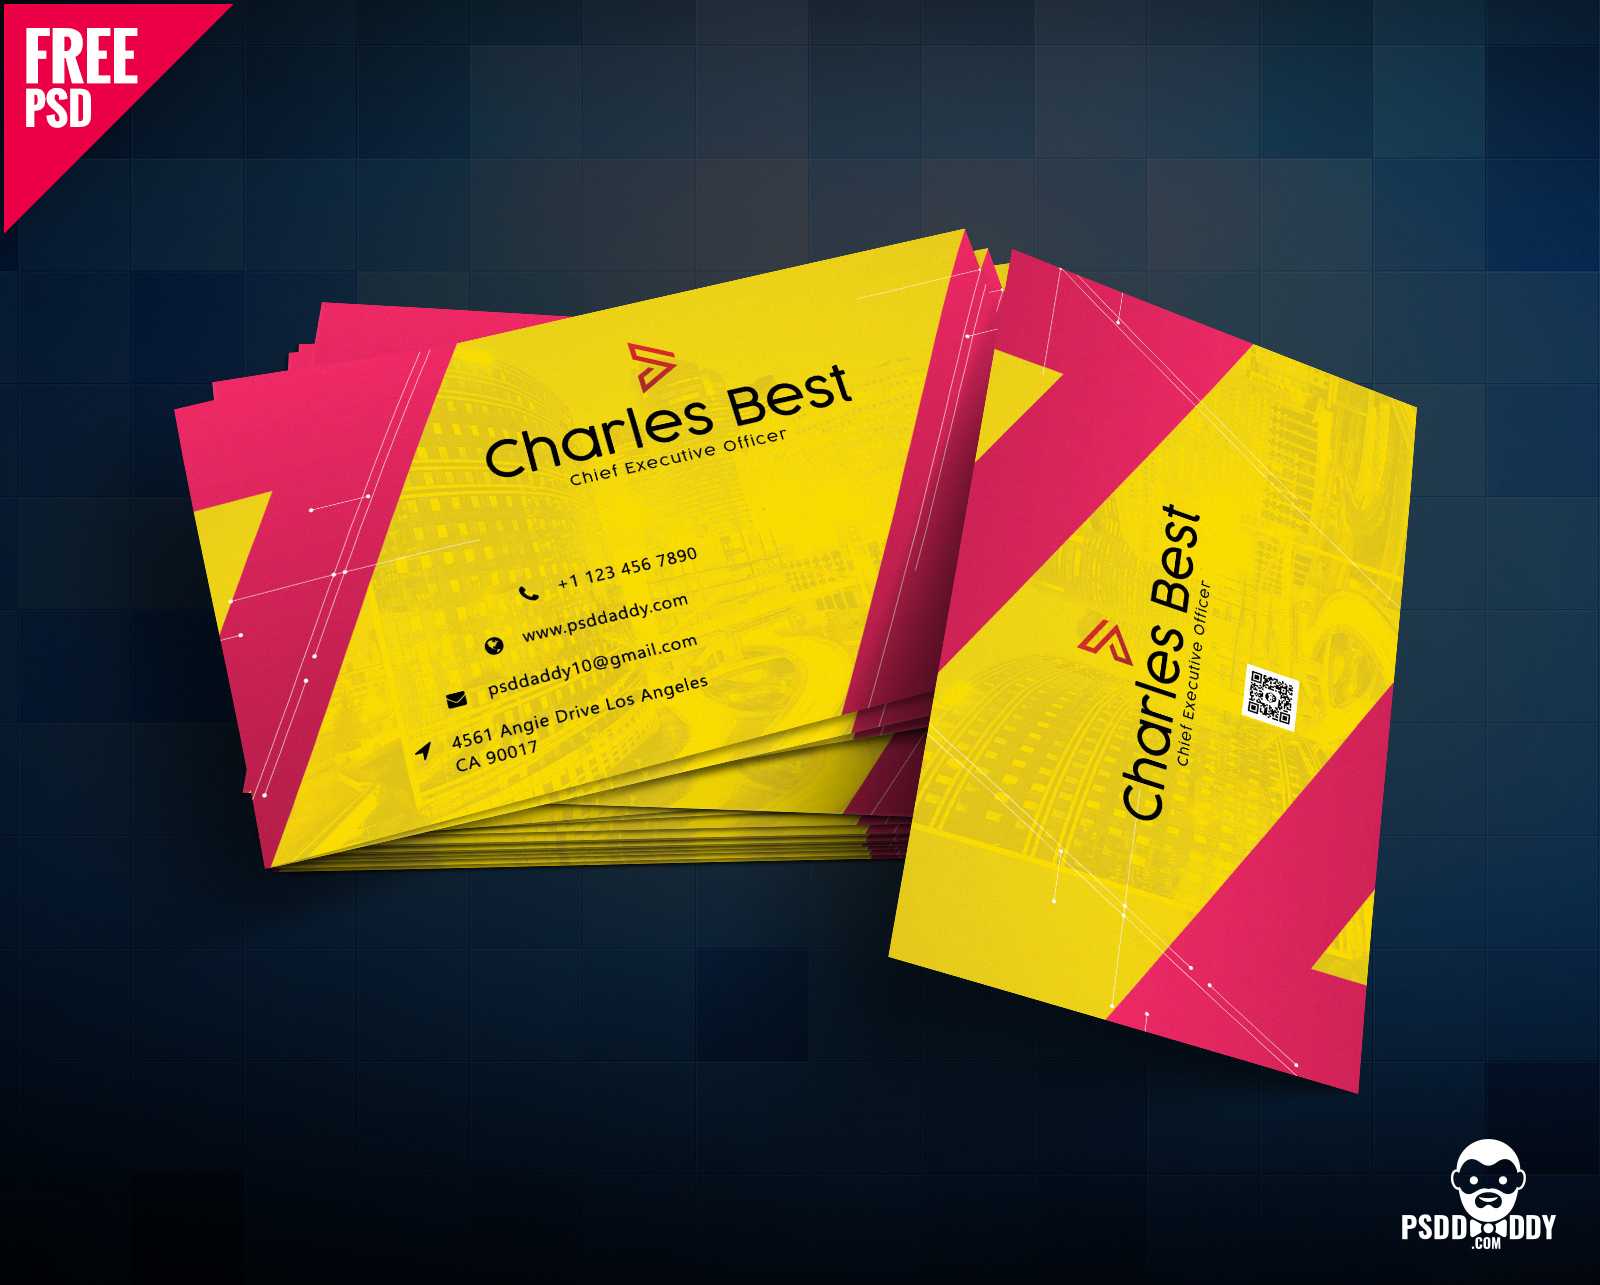 Download] Creative Business Card Free Psd | Psddaddy For Visiting Card Templates For Photoshop